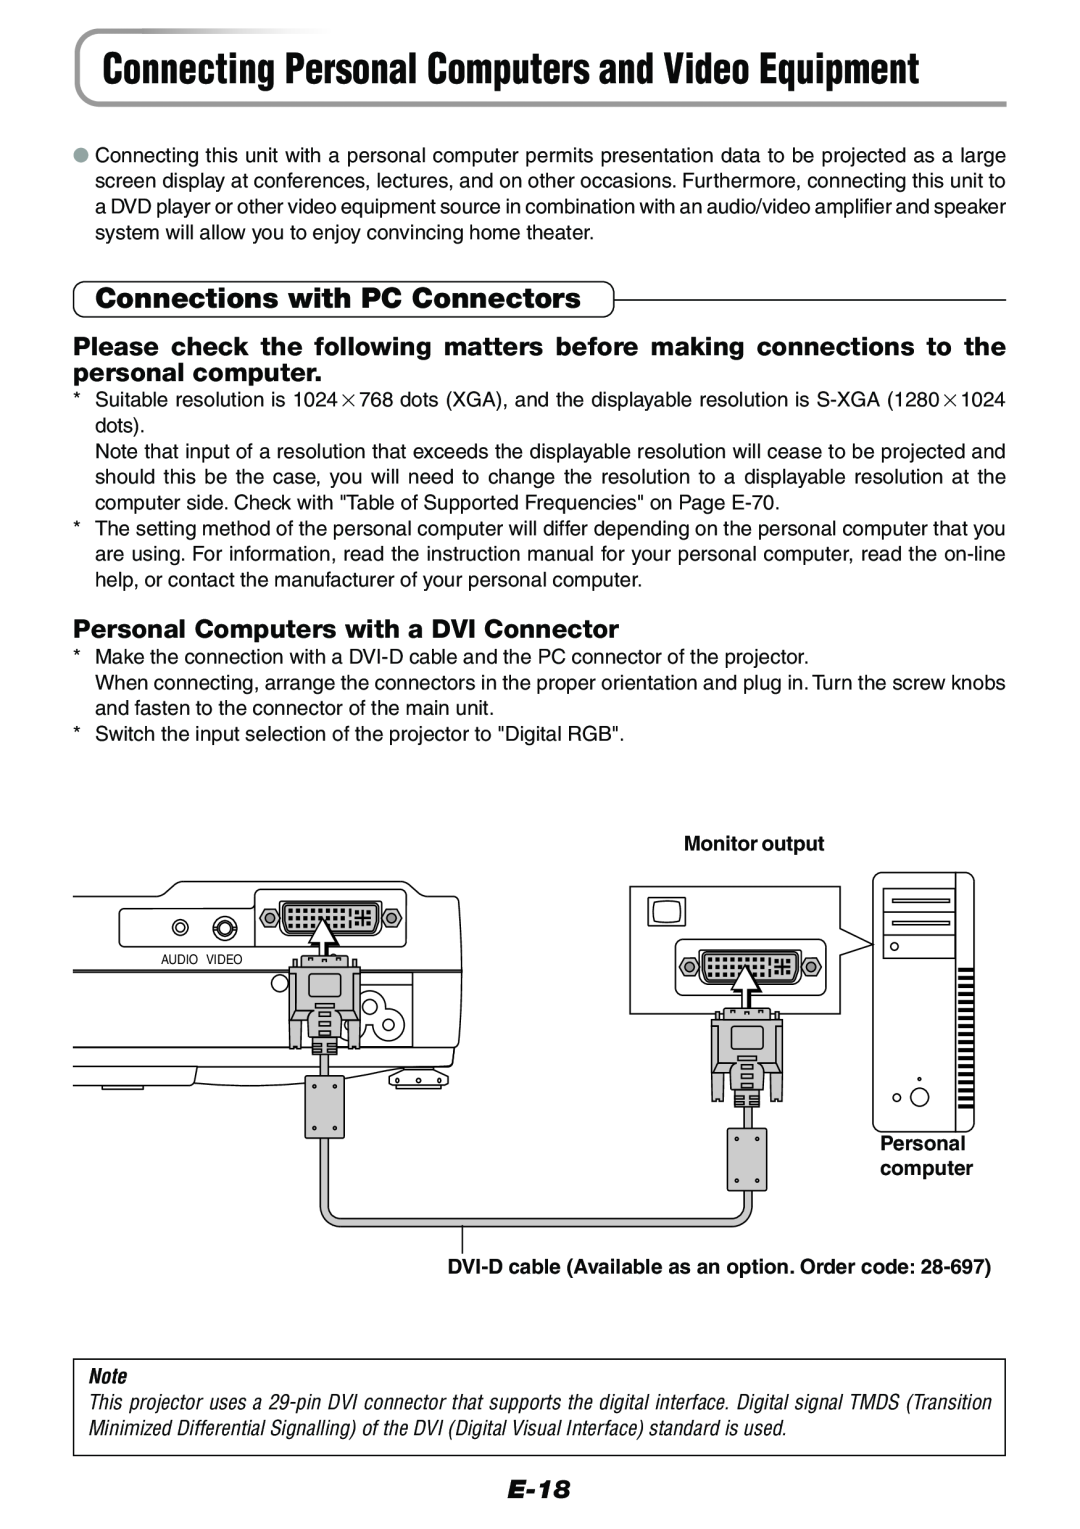 Epson V-1100 user manual Connections with PC Connectors, Personal Computers with a DVI Connector, E-18, Monitor output 